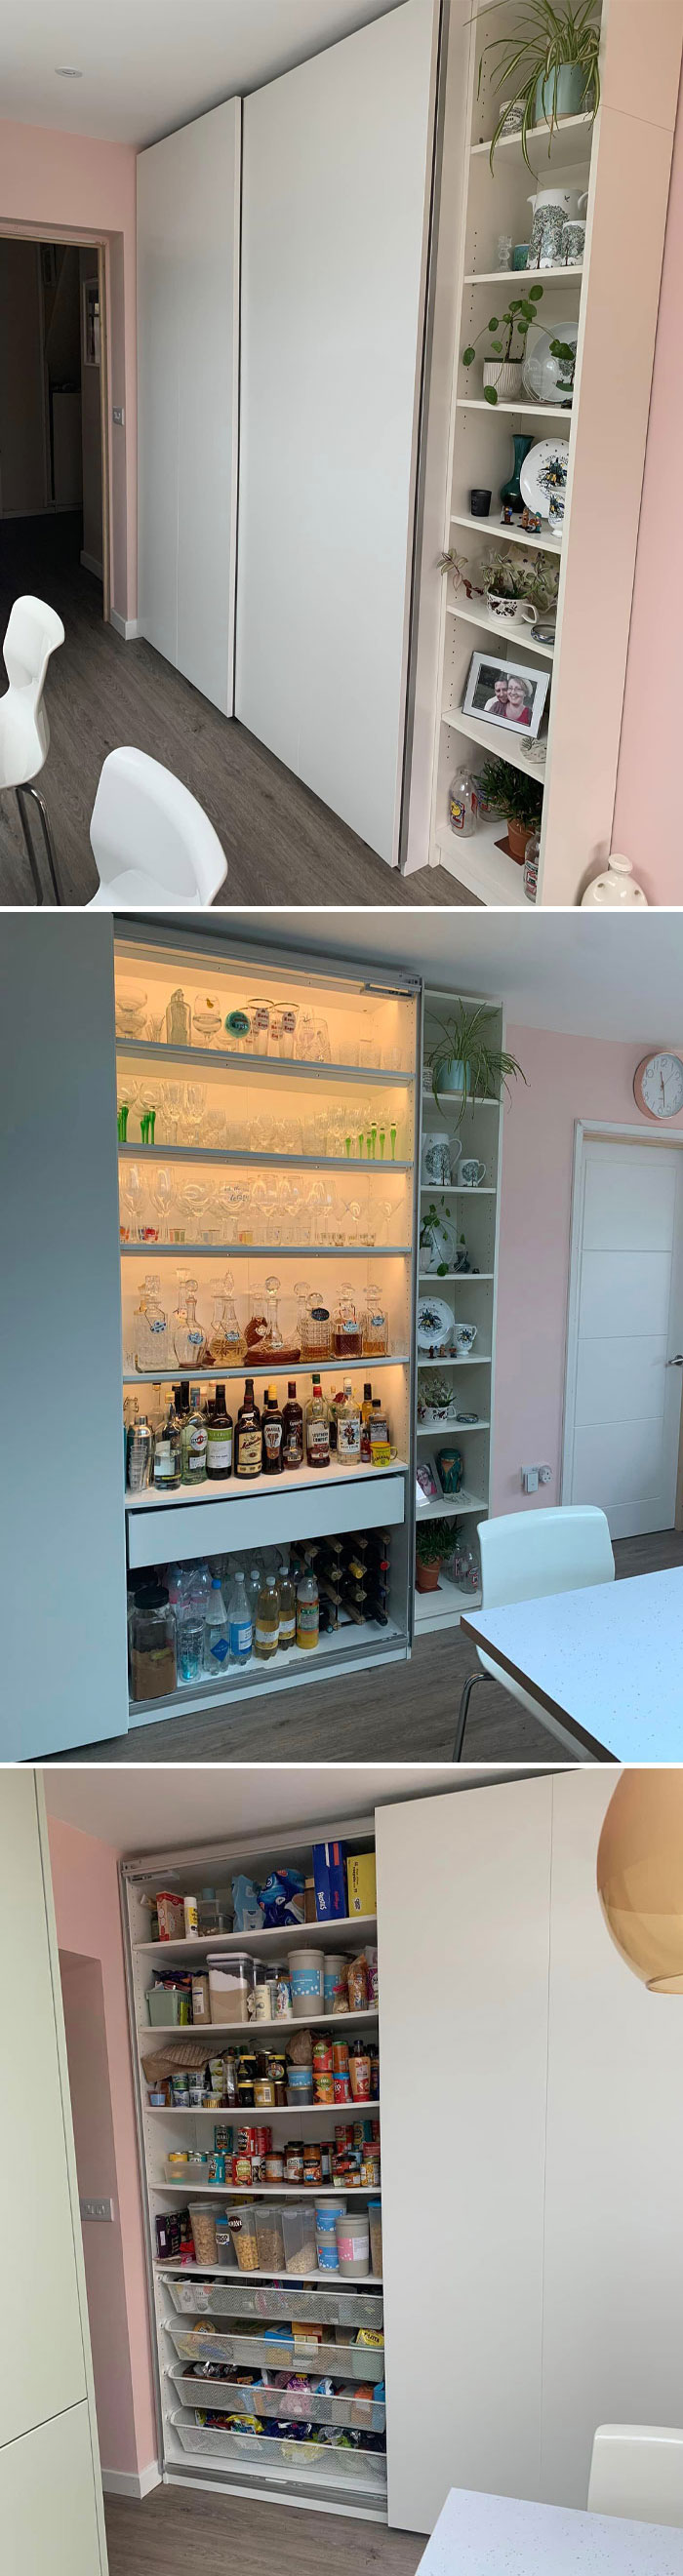 A Different Way To Use IKEA Pax Wardrobes In Our Kitchen - We Wanted A Bar Set Up That Could Be Hidden Away Until Party Time